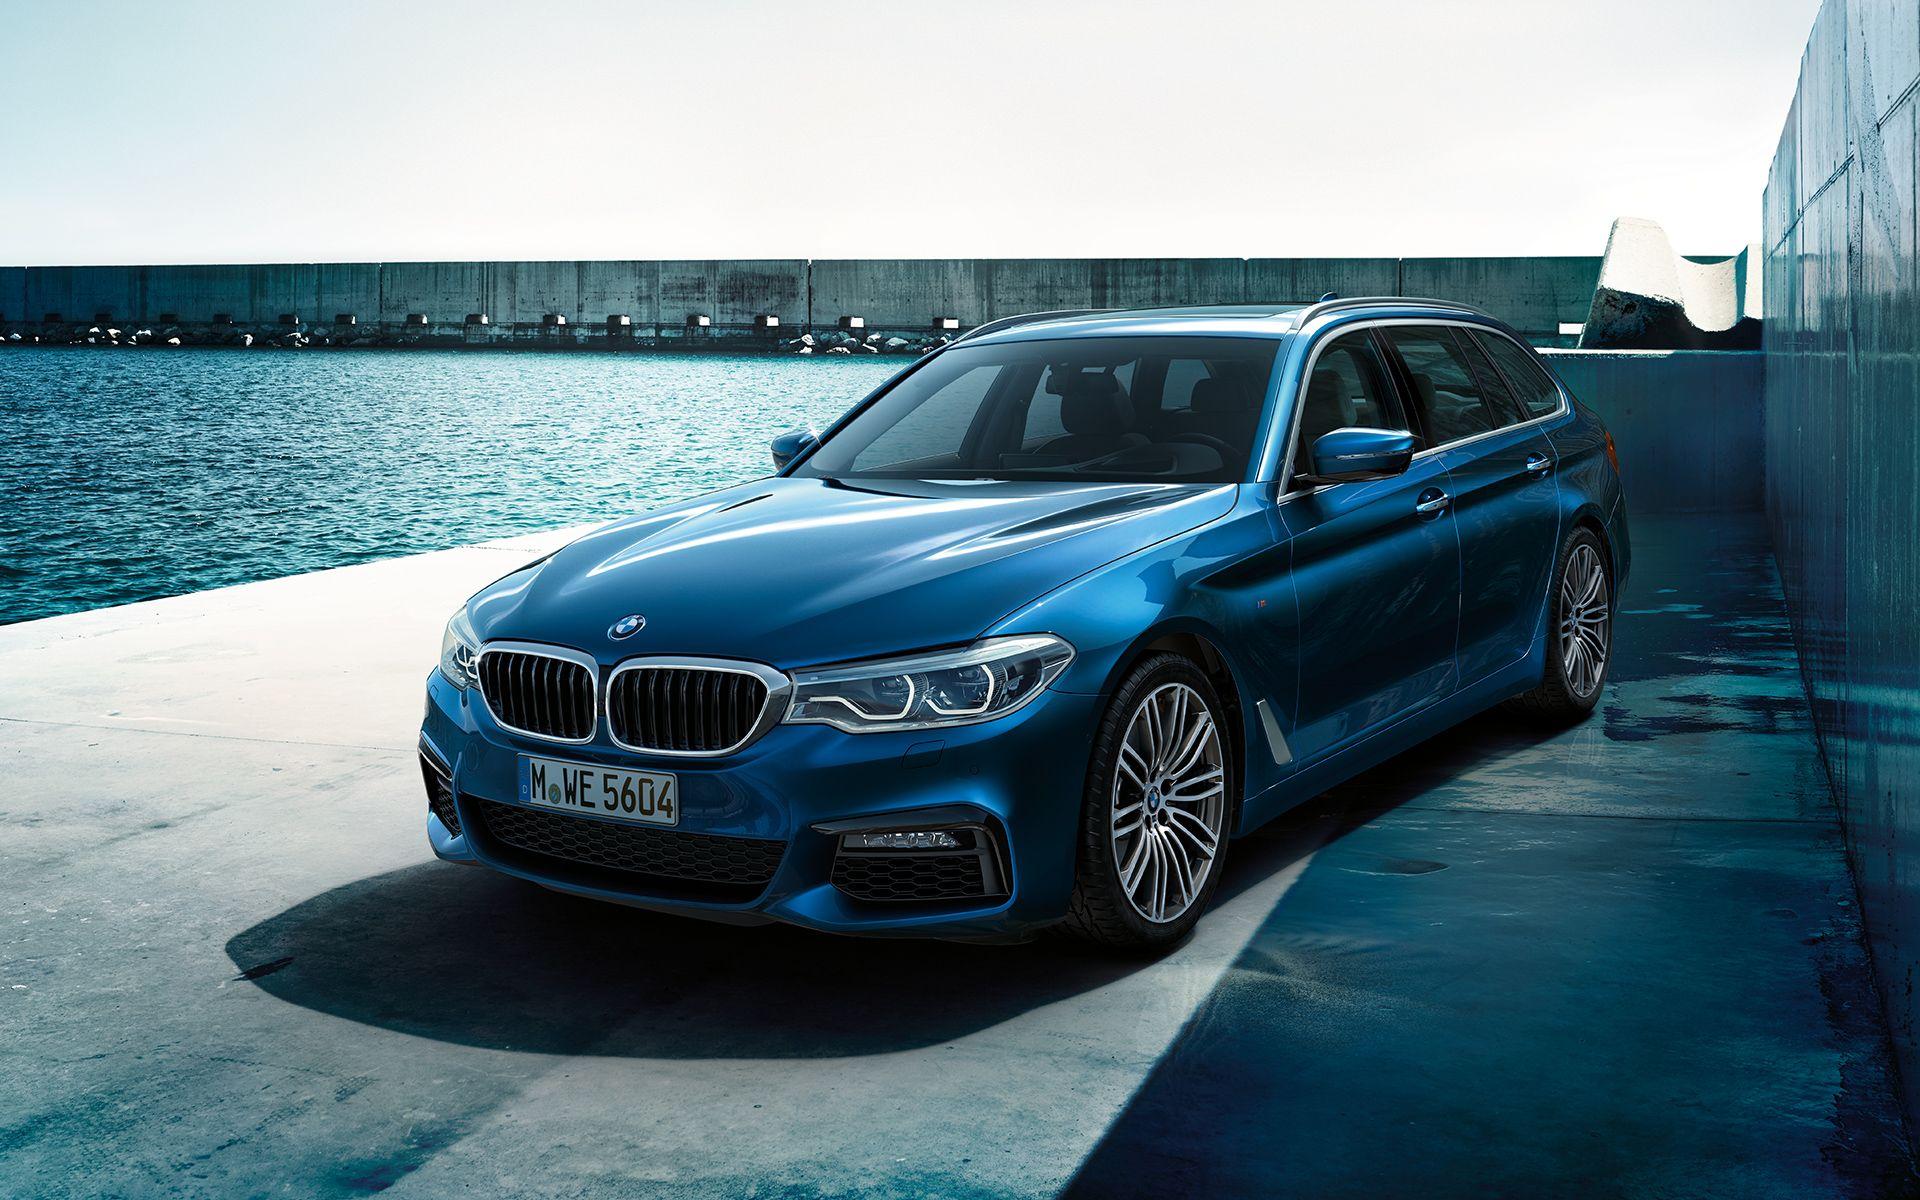 Gorgeous wallpaper of the new 2017 BMW 5 Series Touring